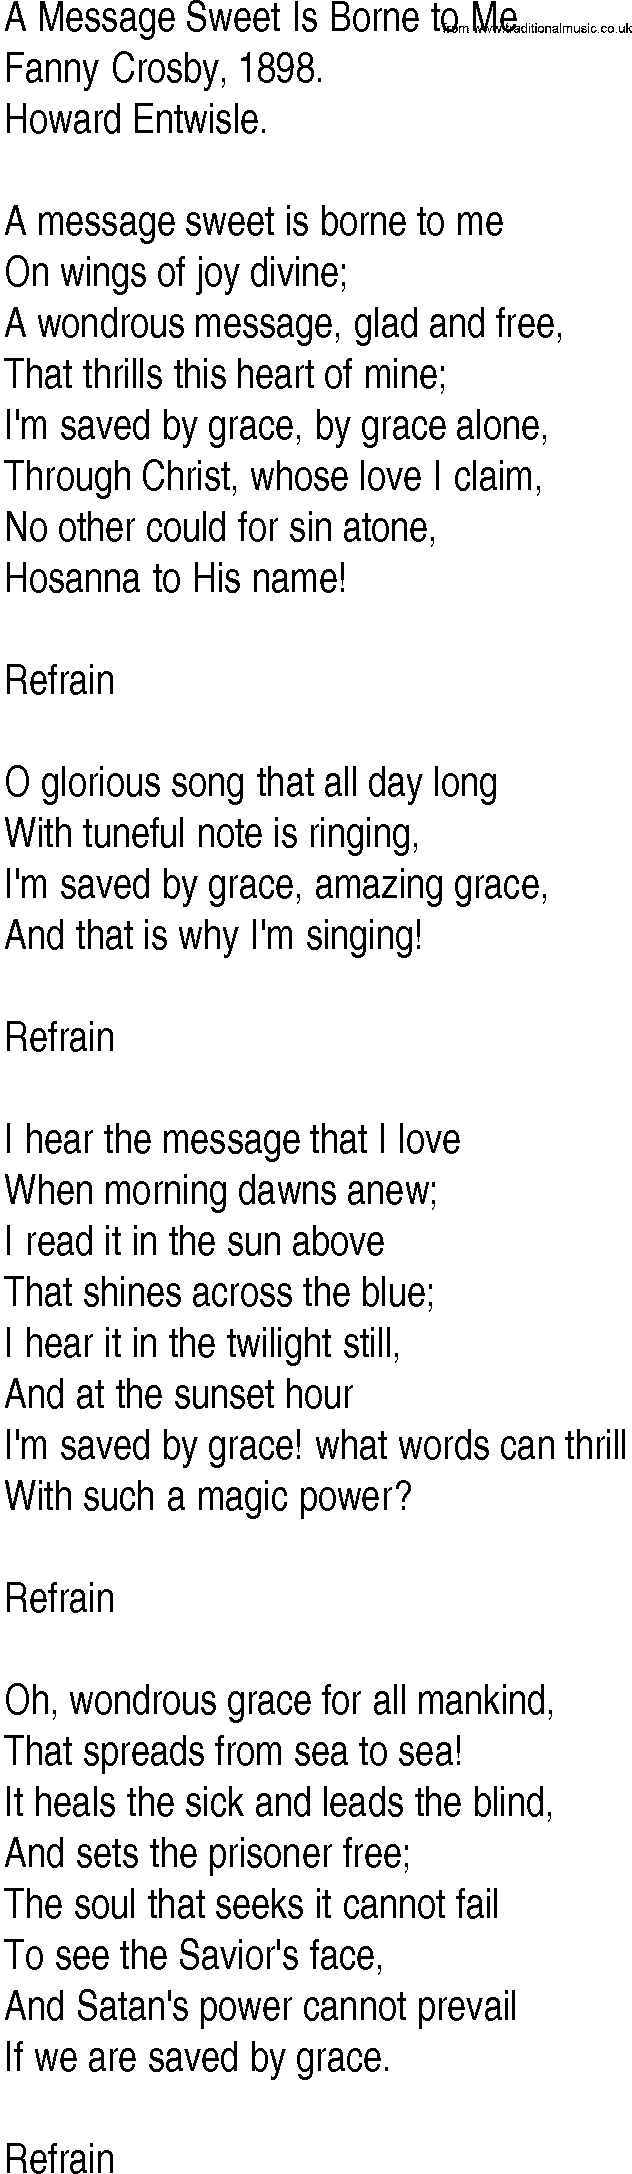 Hymn and Gospel Song: A Message Sweet Is Borne to Me by Fanny Crosby lyrics